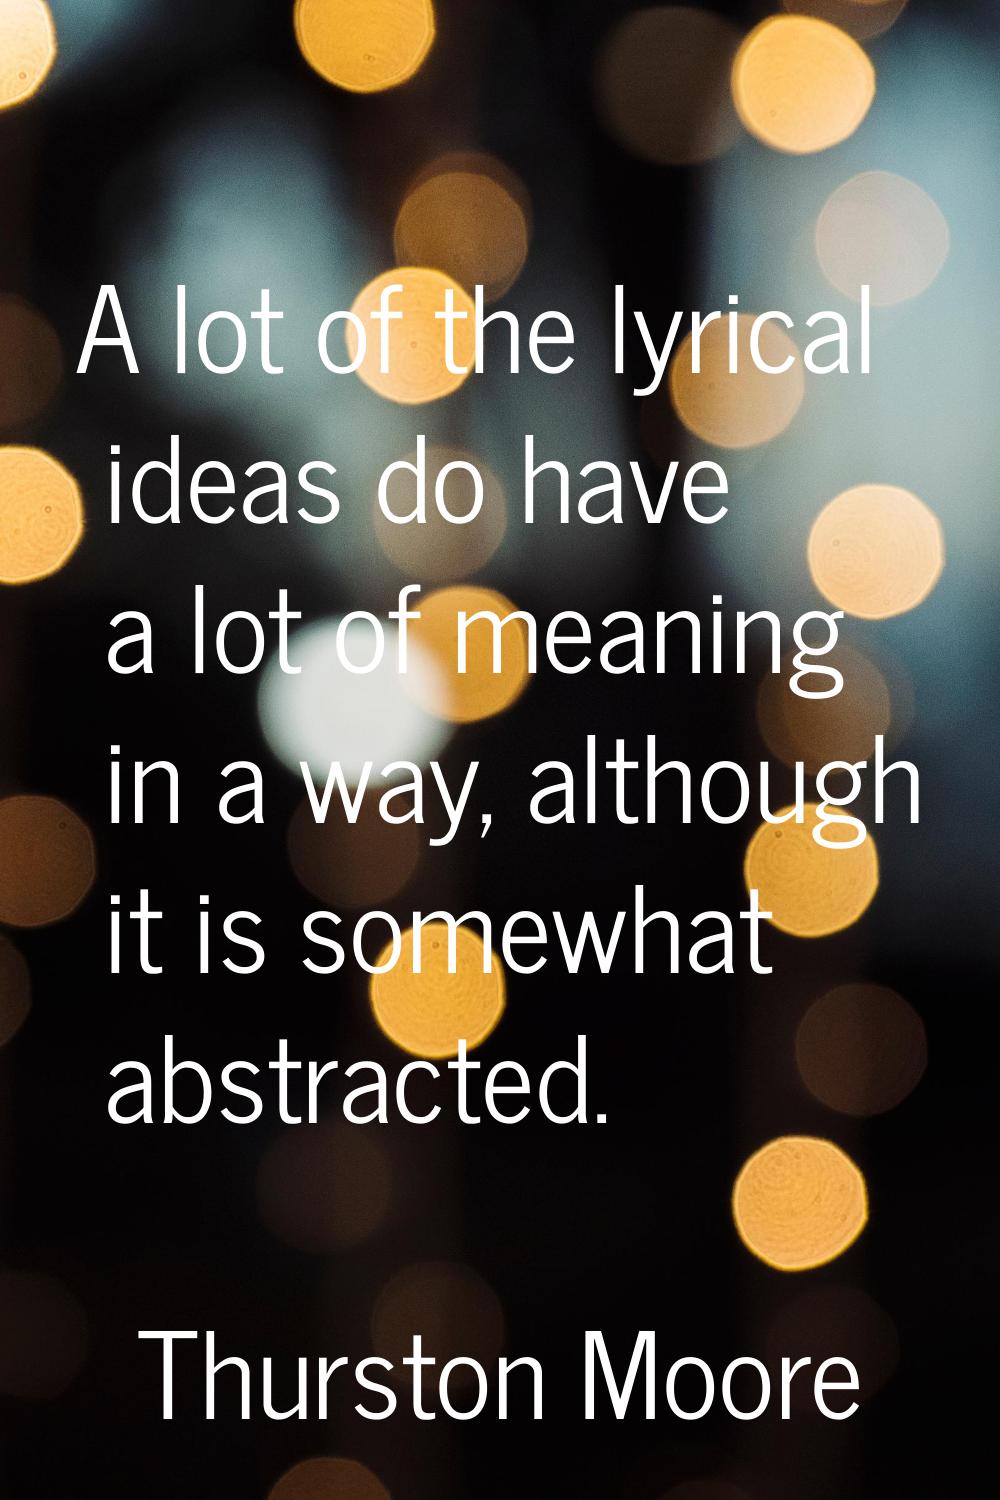 A lot of the lyrical ideas do have a lot of meaning in a way, although it is somewhat abstracted.